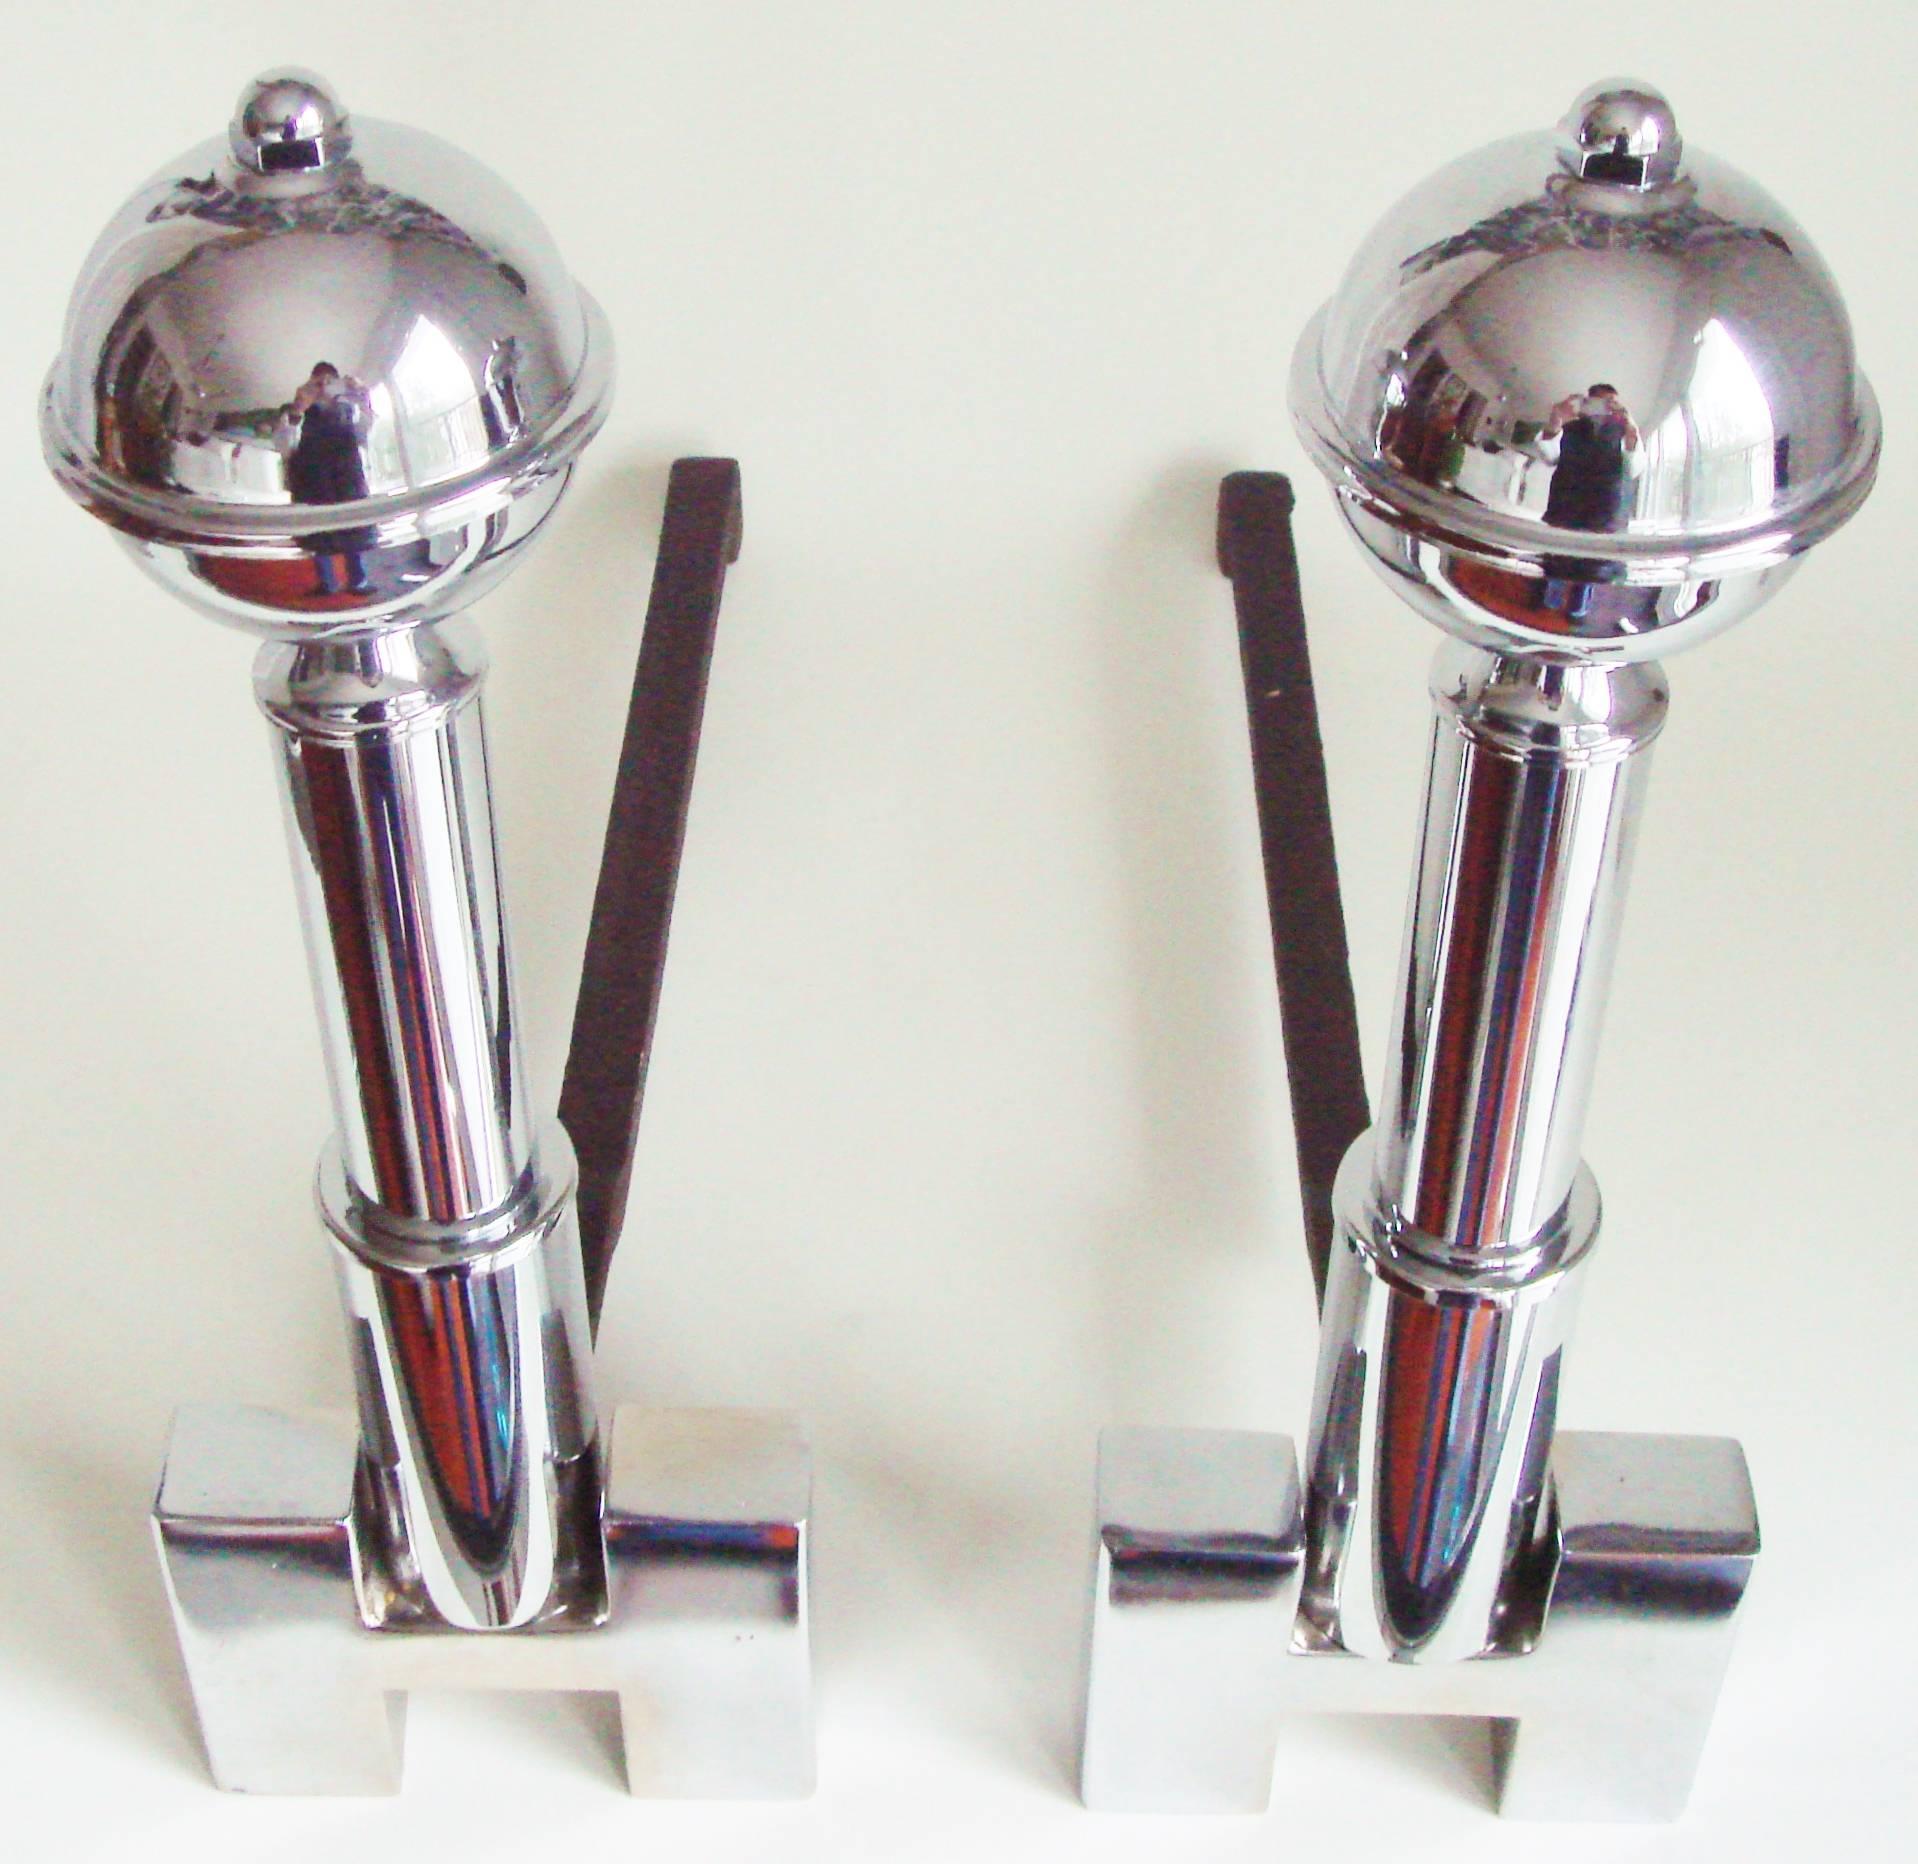 This beautiful pair of American Art Deco chrome-plated geometric andirons each feature planet style orbs that top a skyscraper shaped two stage pillar that rises from the crossbar of an 'H' shaped plinth. The chrome is in excellent condition as are